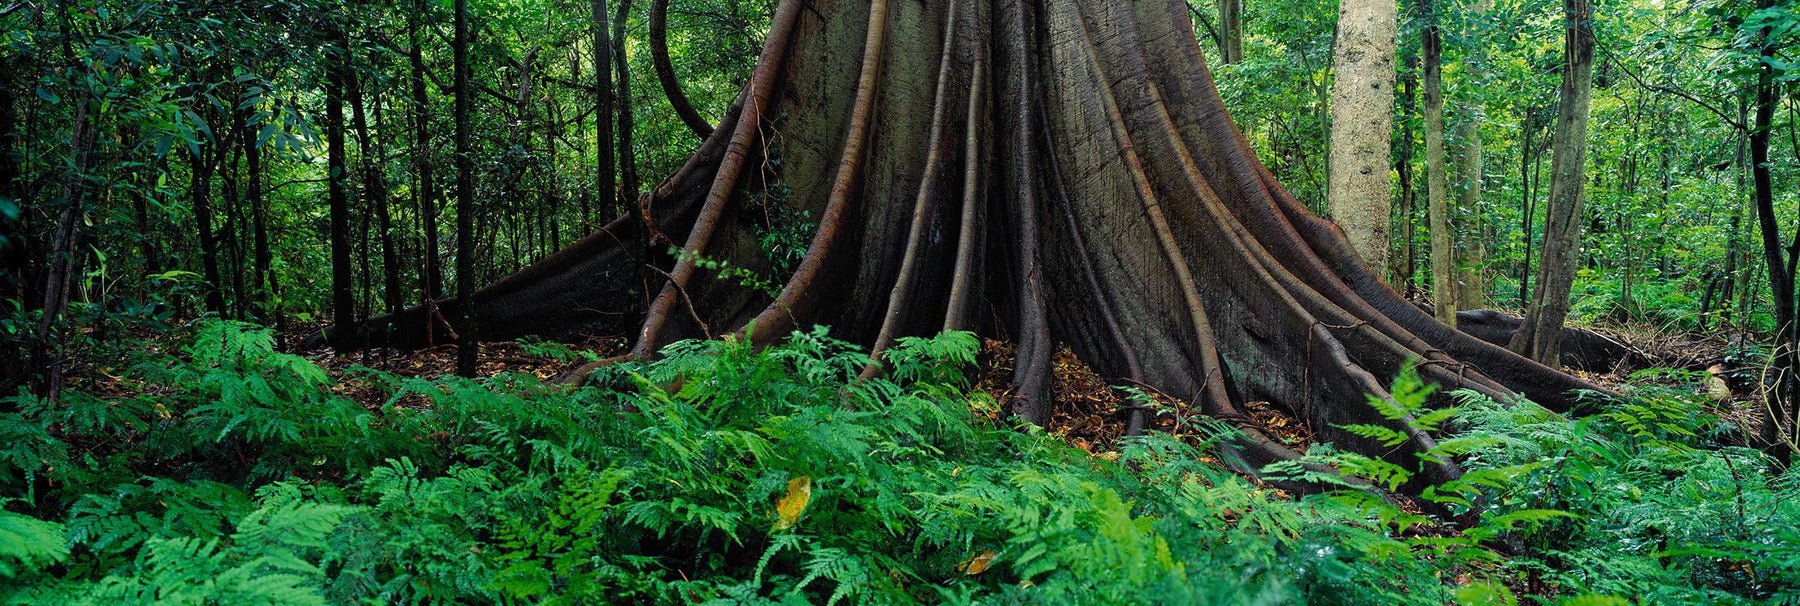 The base and root system of a giant stinging tree in the middle of the rainforest in Dorrigo National Park Australia